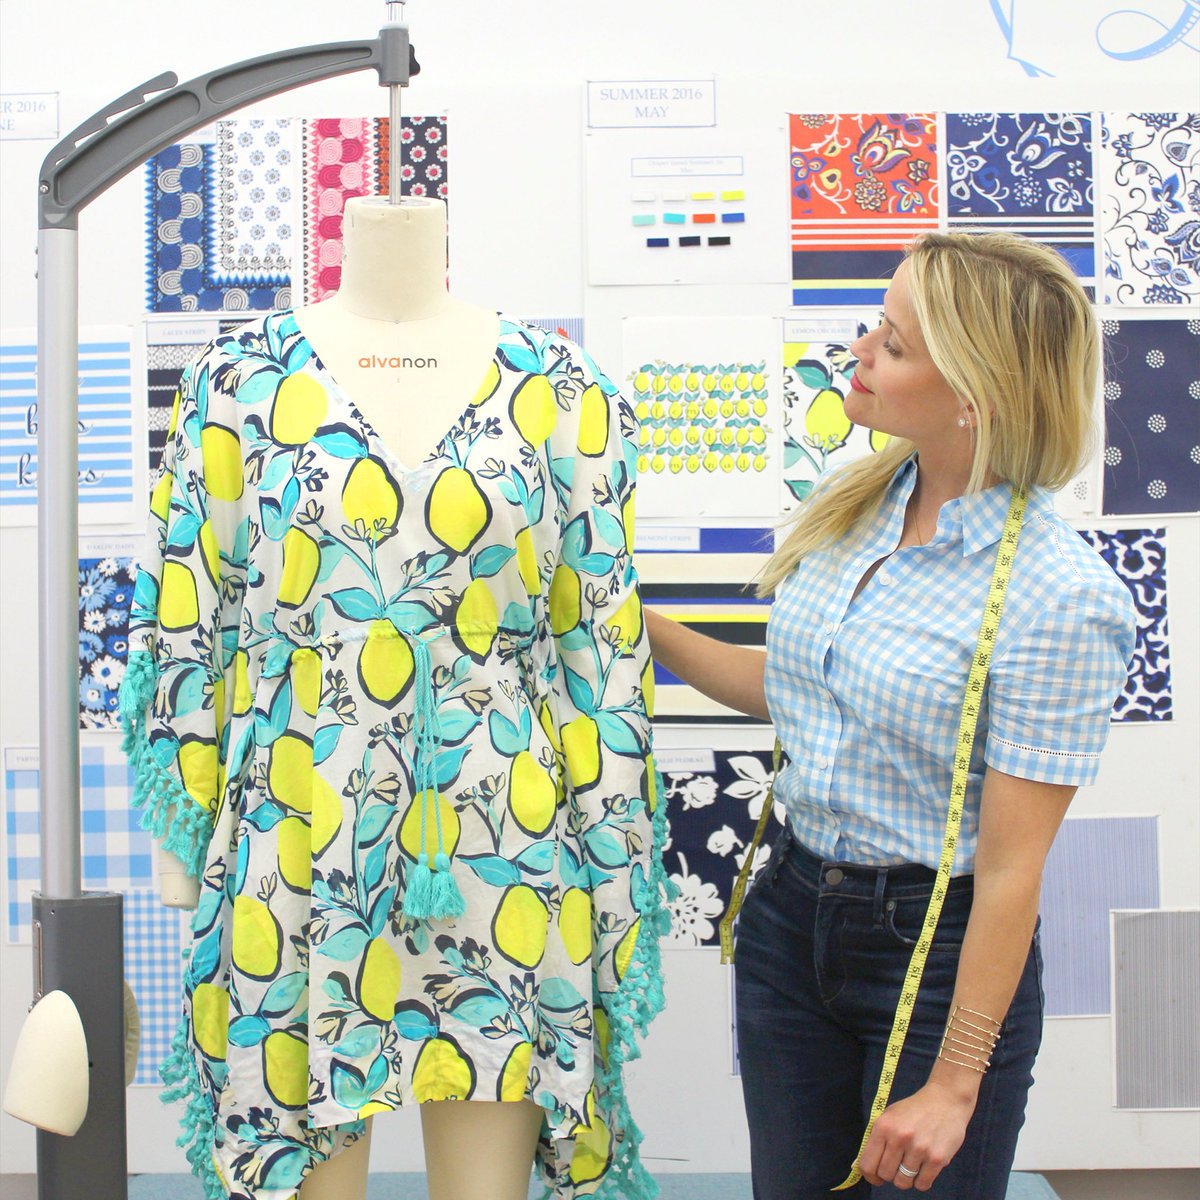 Musing over caftans at @draperjames HQ! ???????? (See all the #CaftanLove: https://t.co/tMwutgMjvS) https://t.co/WXQpGt8SXV